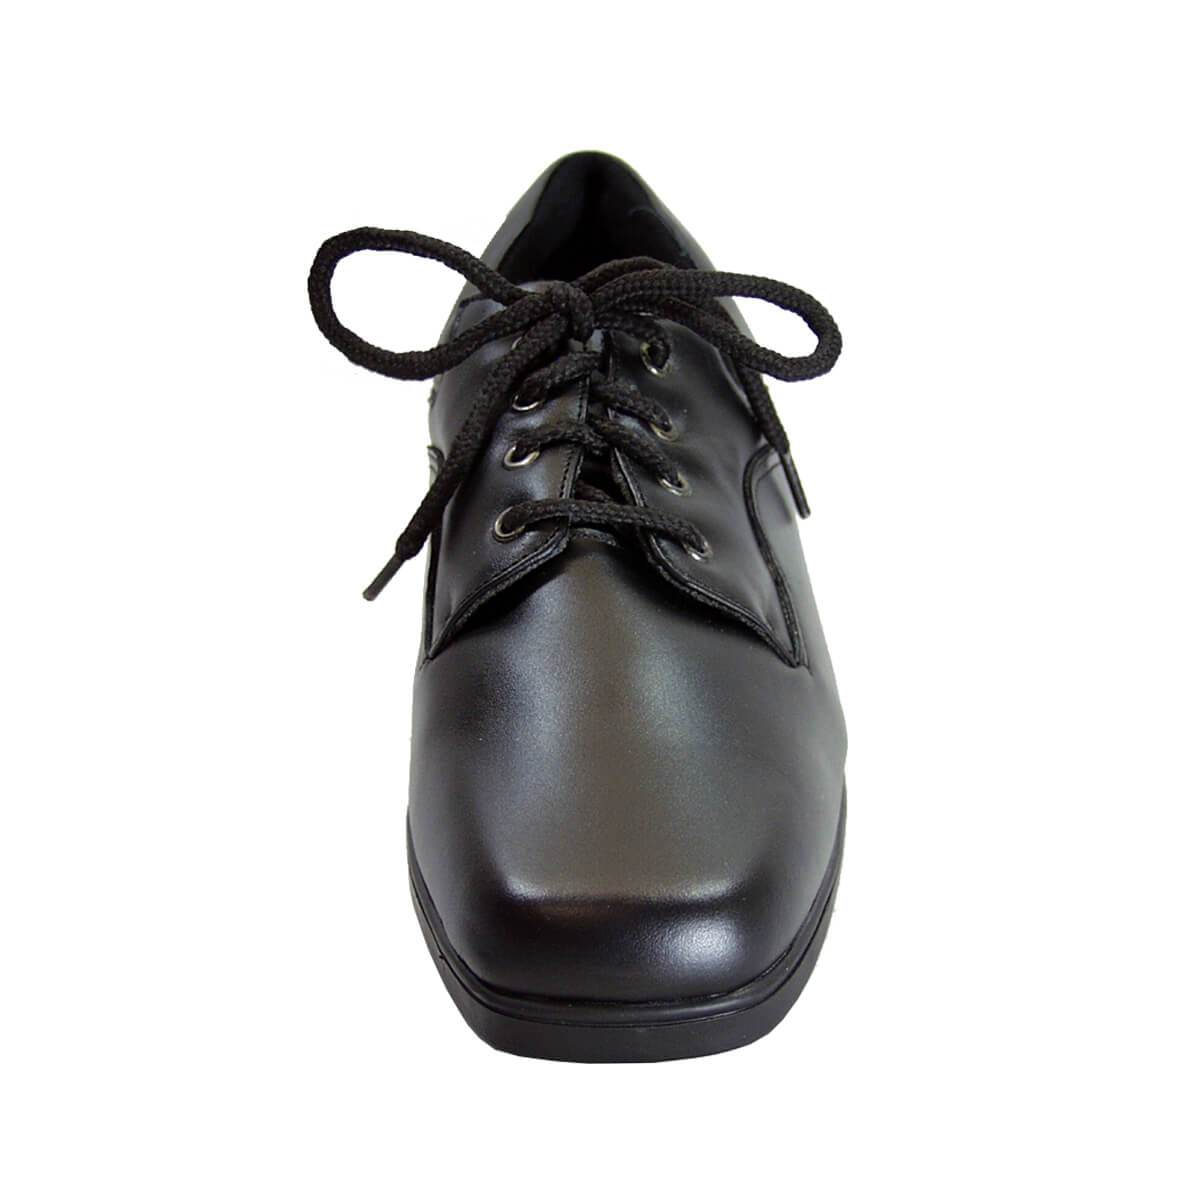 24 HOUR COMFORT Cherie Women's Wide Width Leather Oxfords